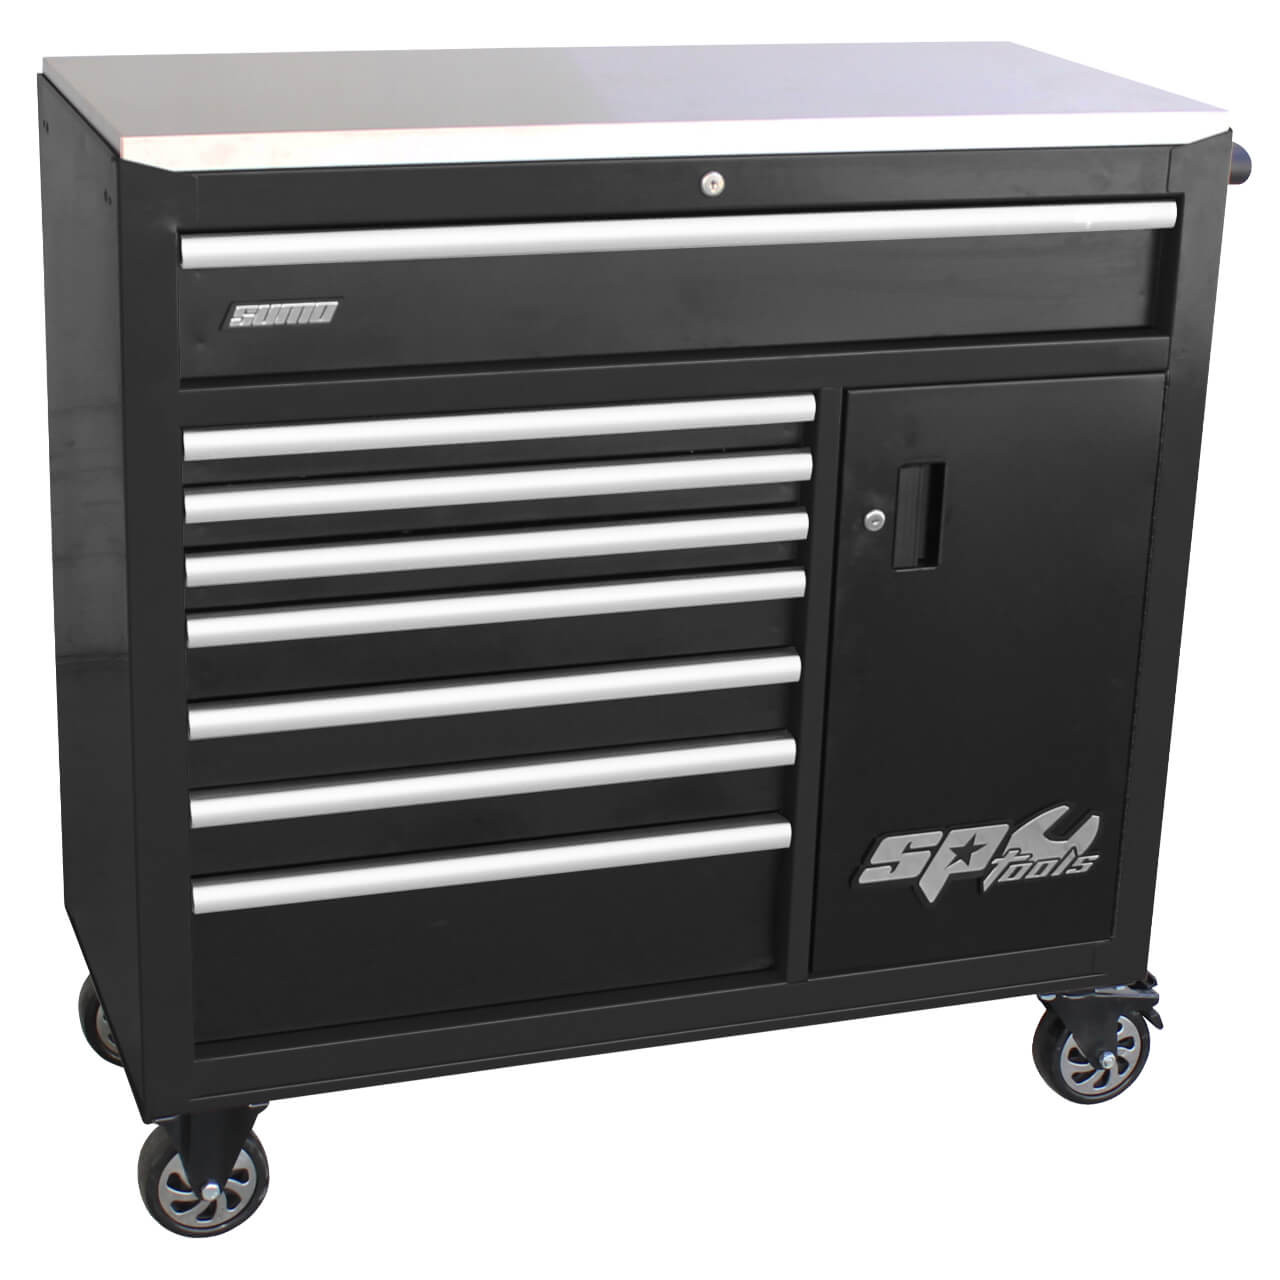 SP Tools 9 Drawer Sumo Series Roller Cabinet Black Chrome